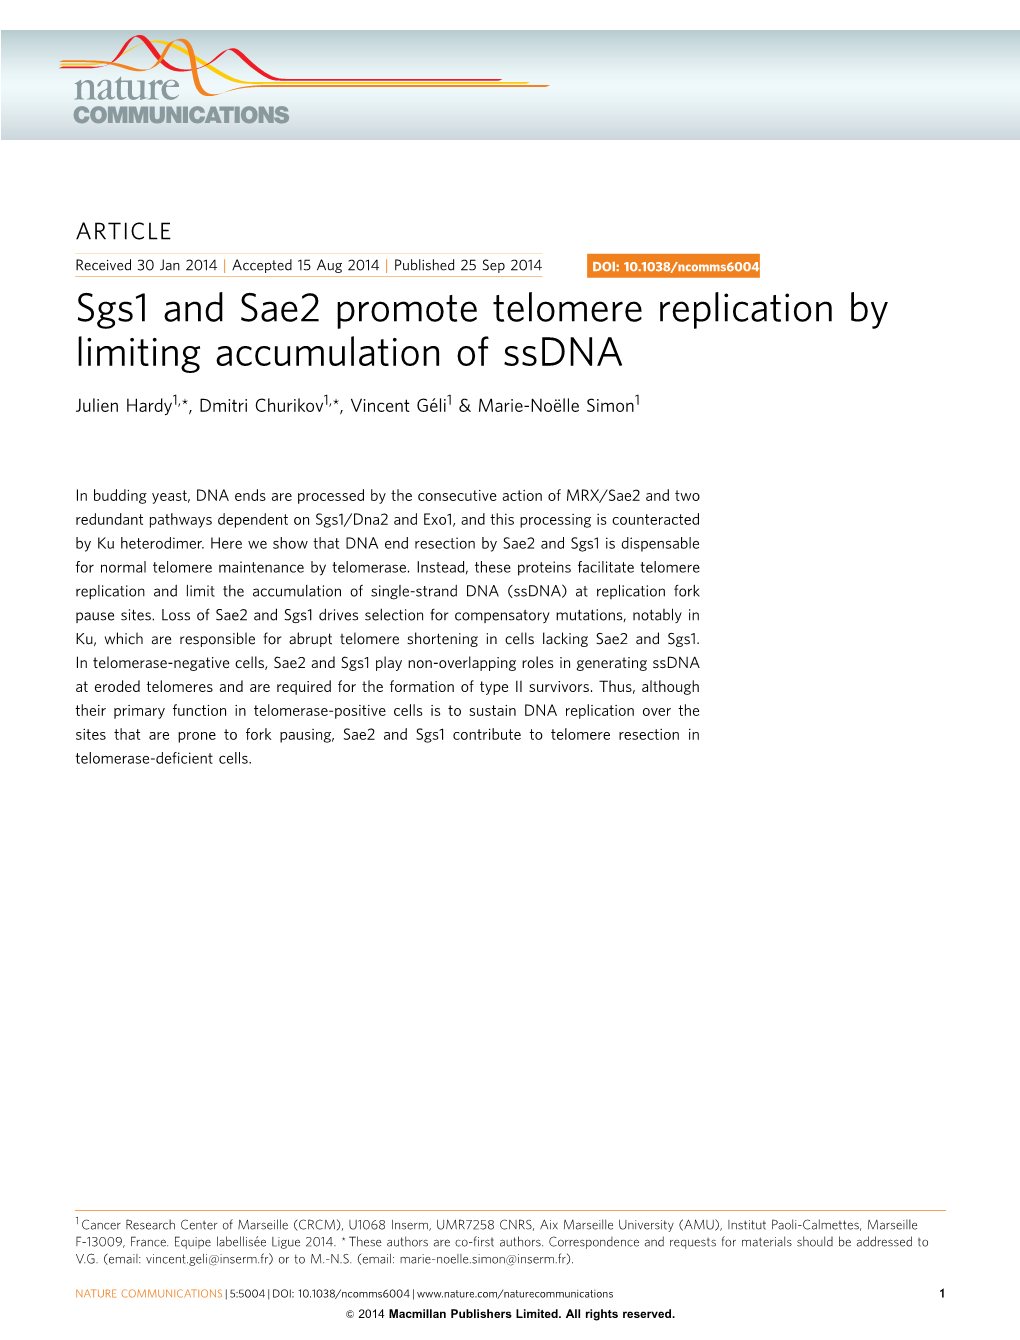 Sgs1 and Sae2 Promote Telomere Replication by Limiting Accumulation of Ssdna